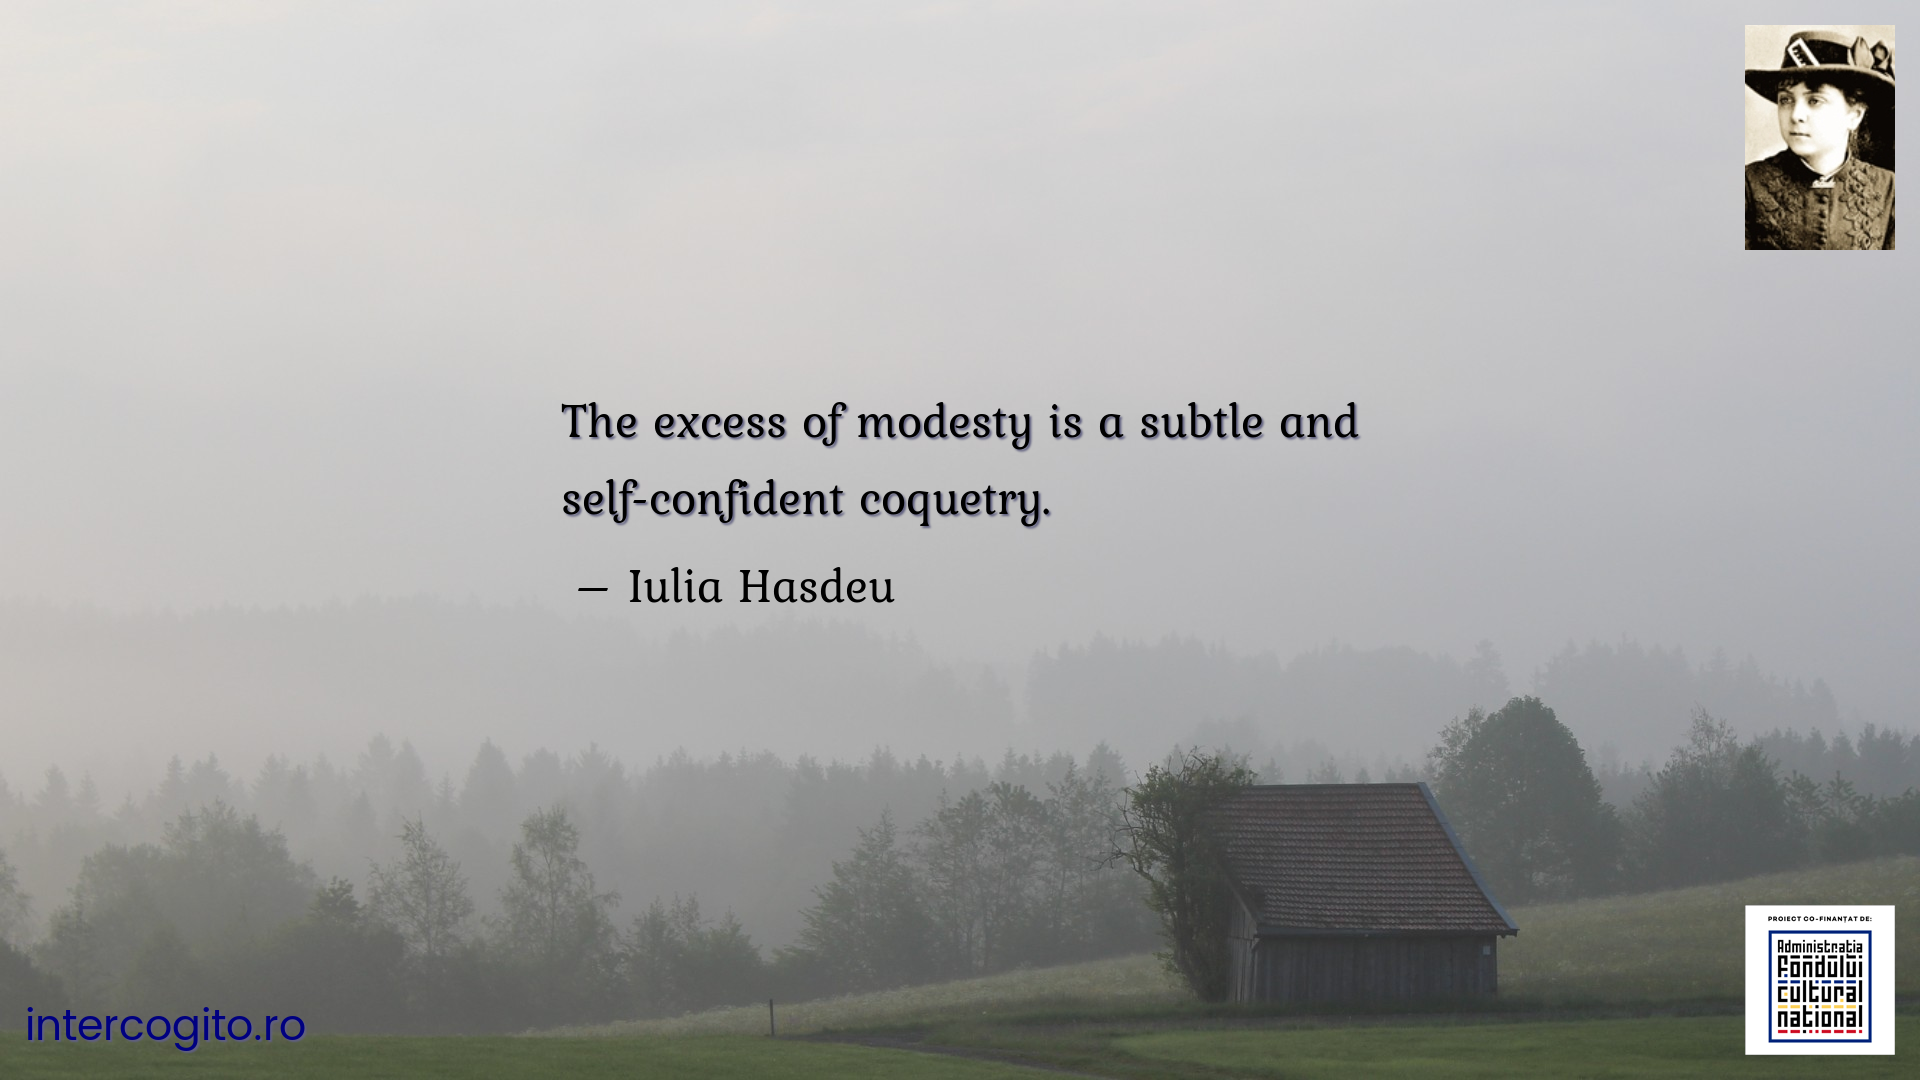 The excess of modesty is a subtle and self-confident coquetry.